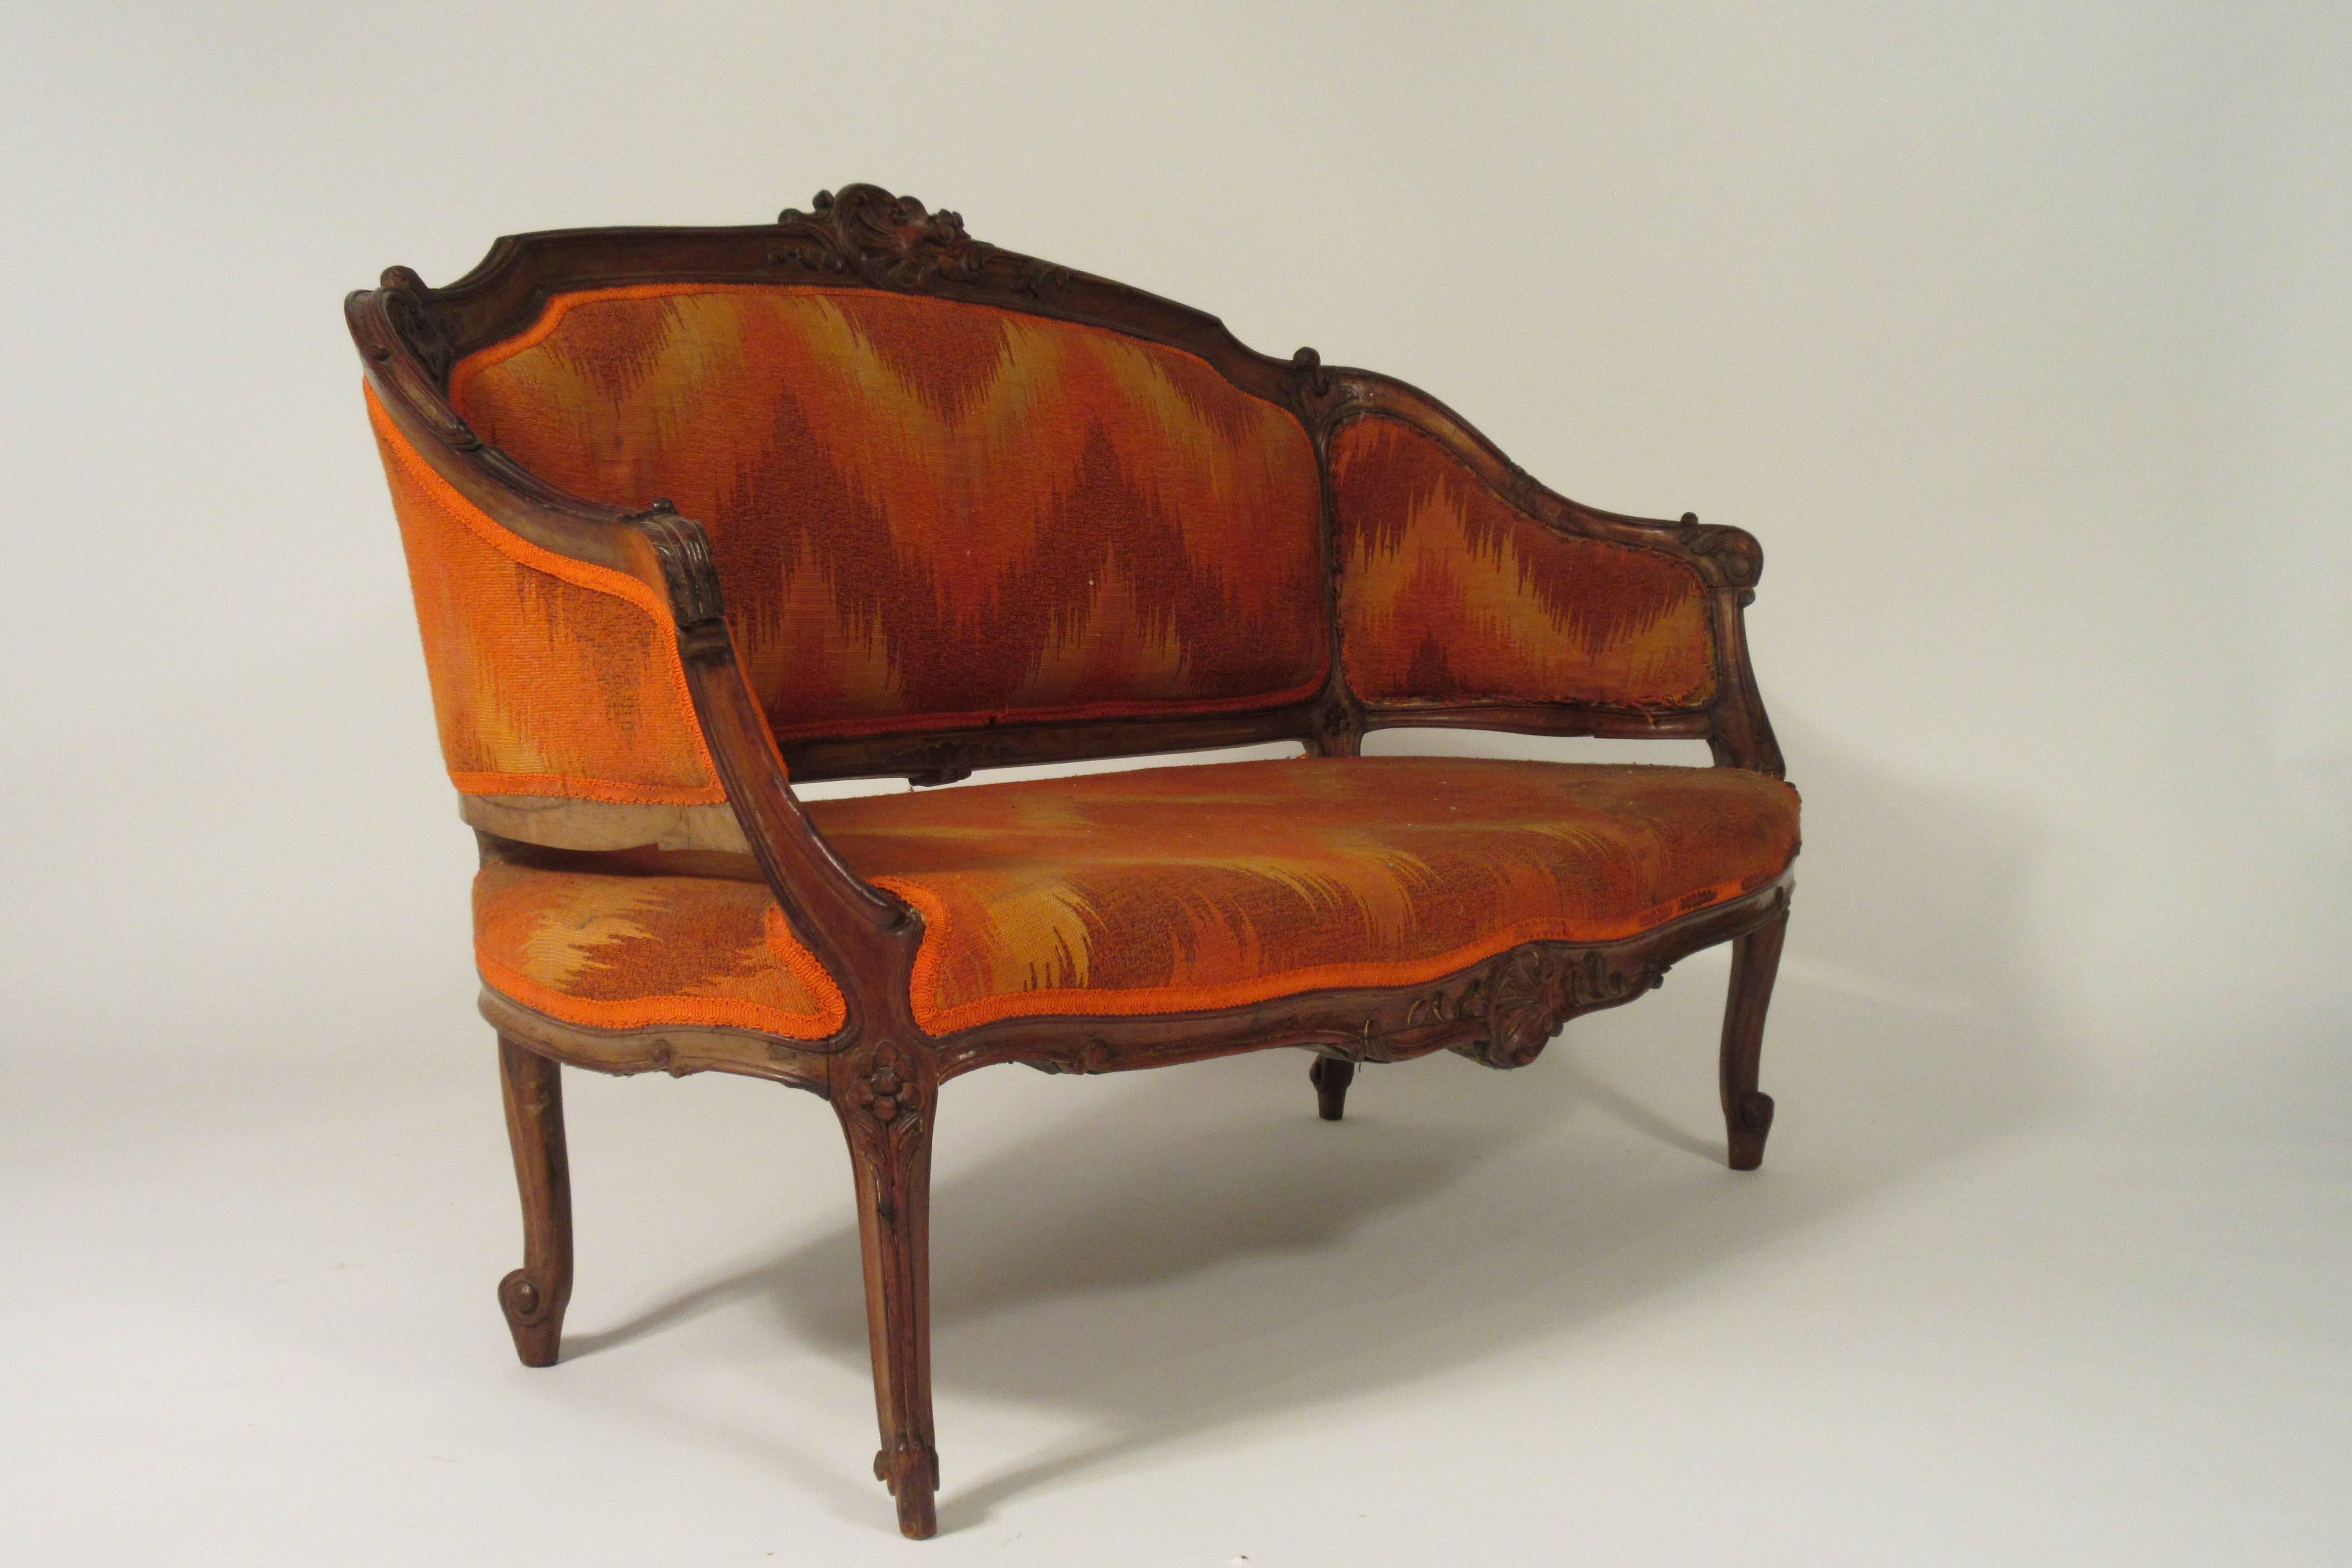 1940s carved wood French style settee.